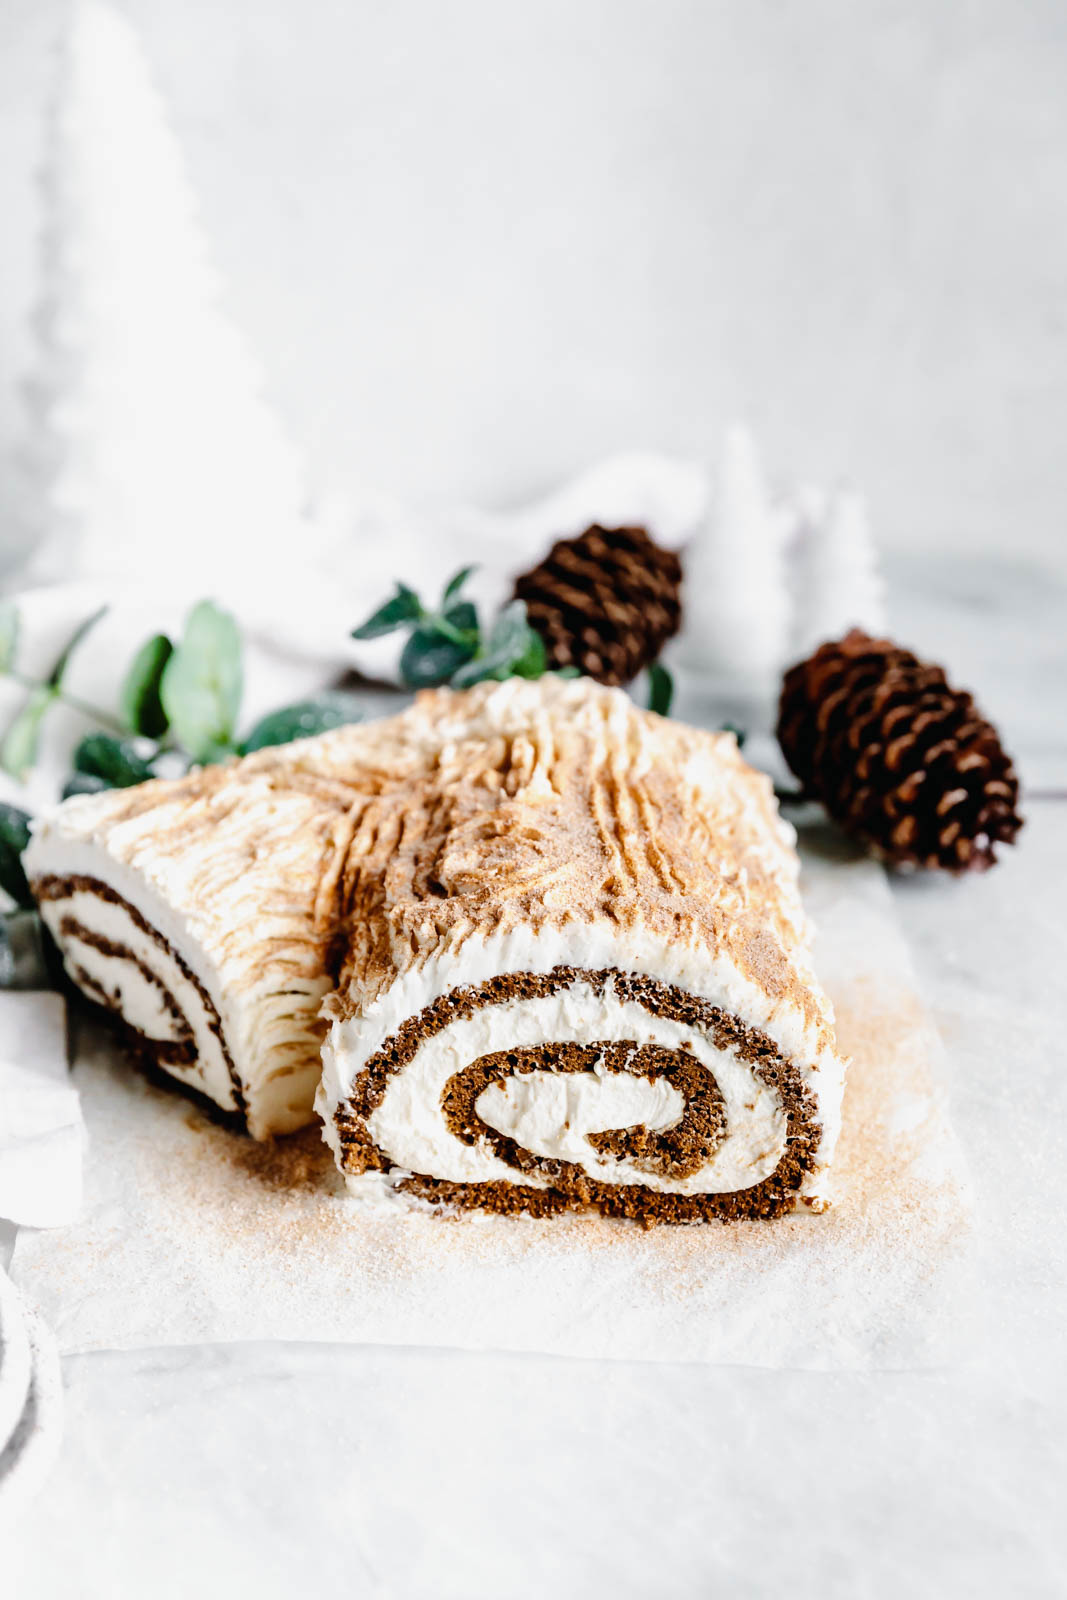 This festive White Chocolate Gingerbread Yule Log is a showstopper Christmas dessert. Made with white chocolate buttercream "bark" for that rustic look!